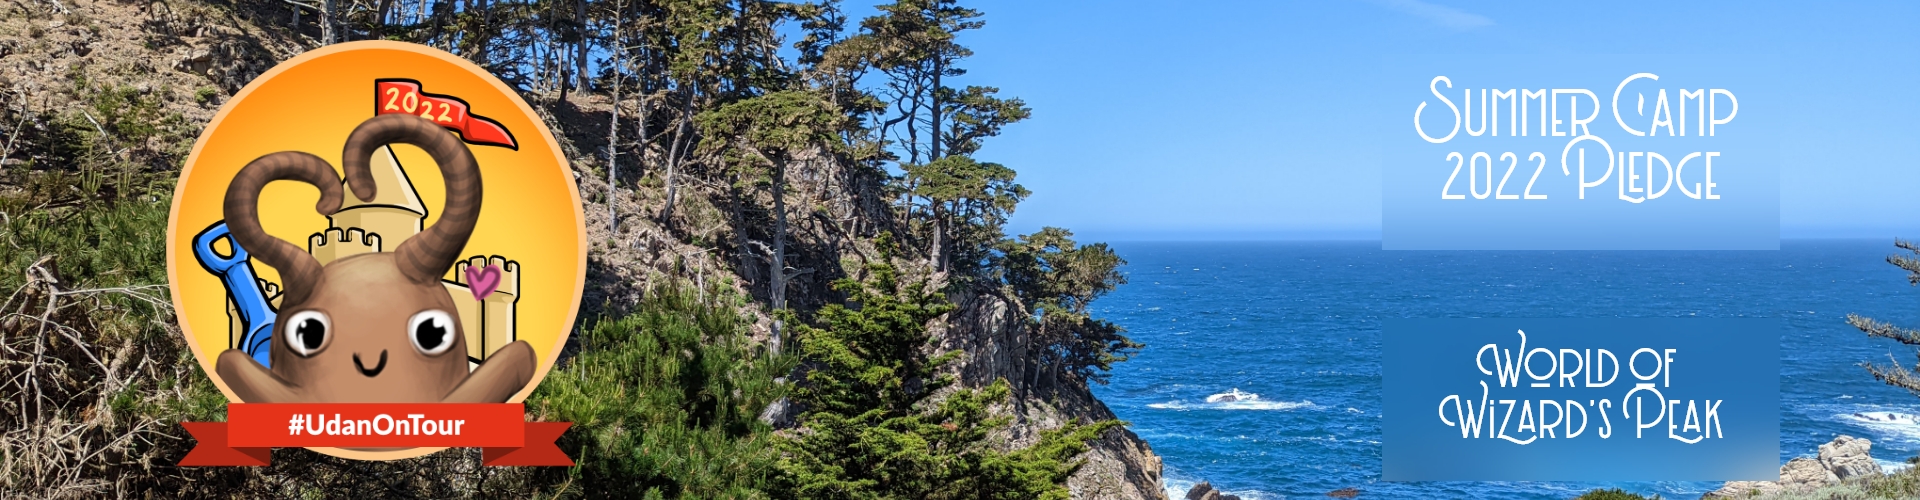 Header of a coastline with trees